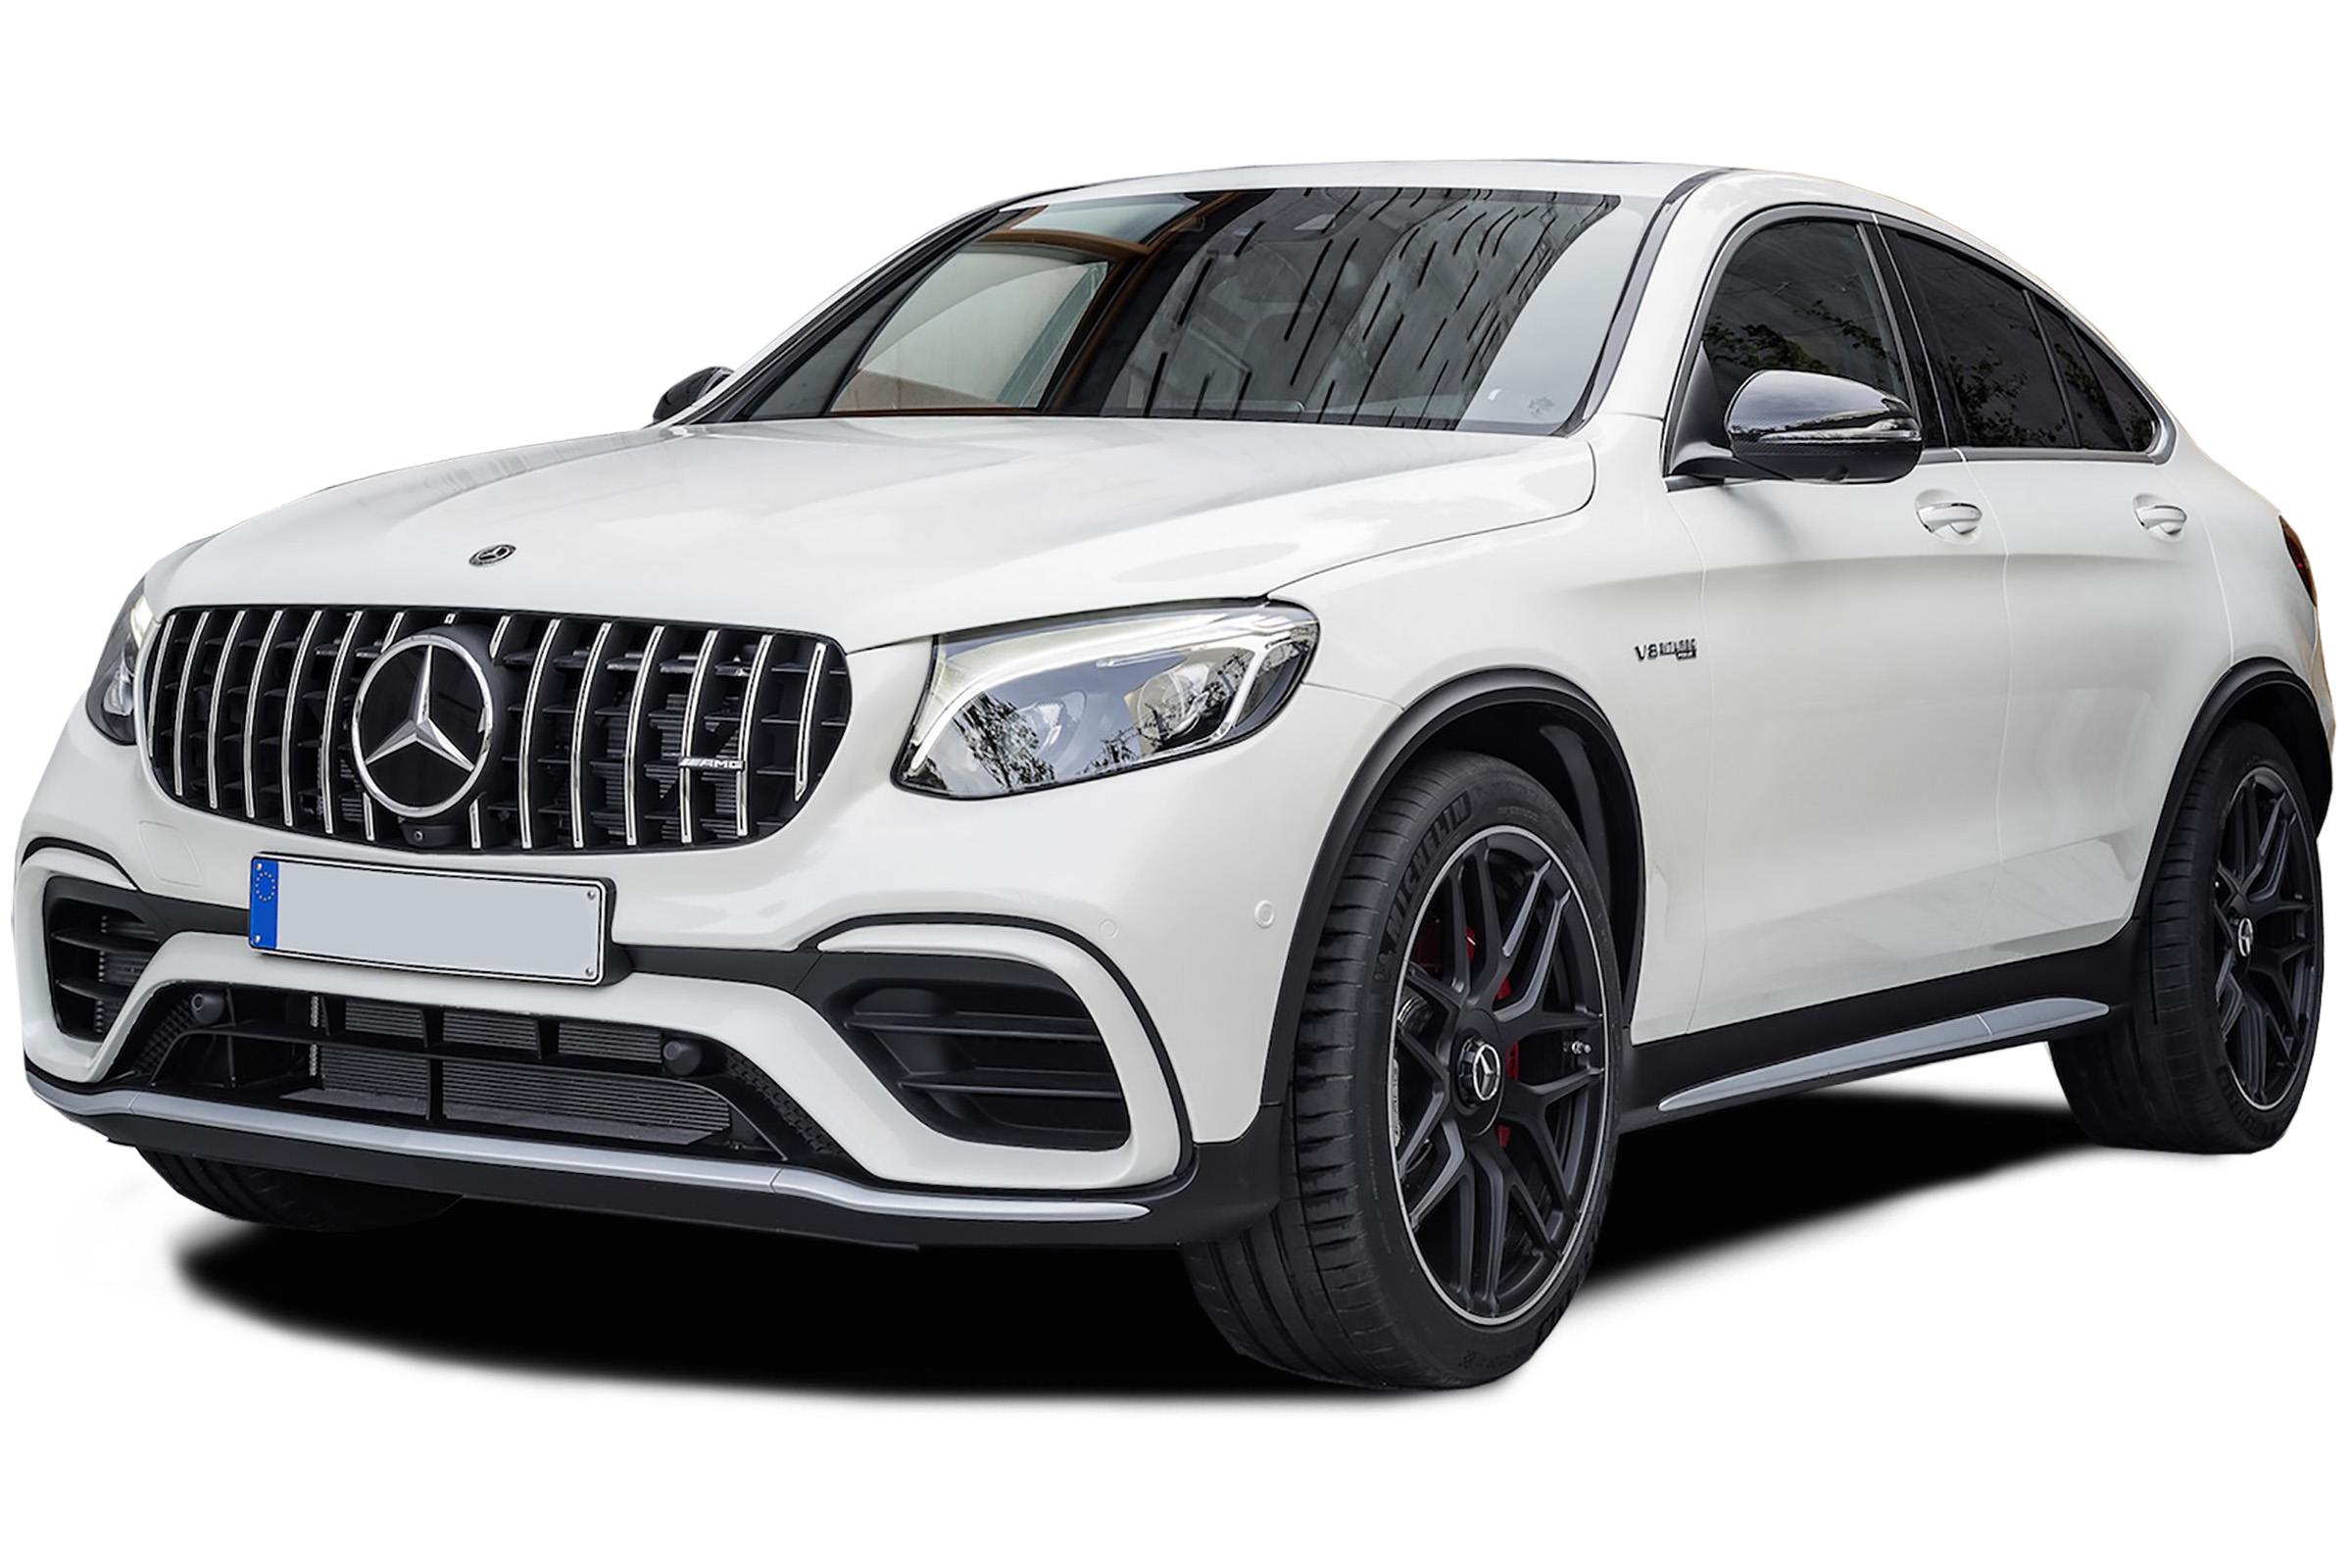 Mercedes-Benz GLC Coupe Car Mileage, Engine, Price, Space, Safety and Features